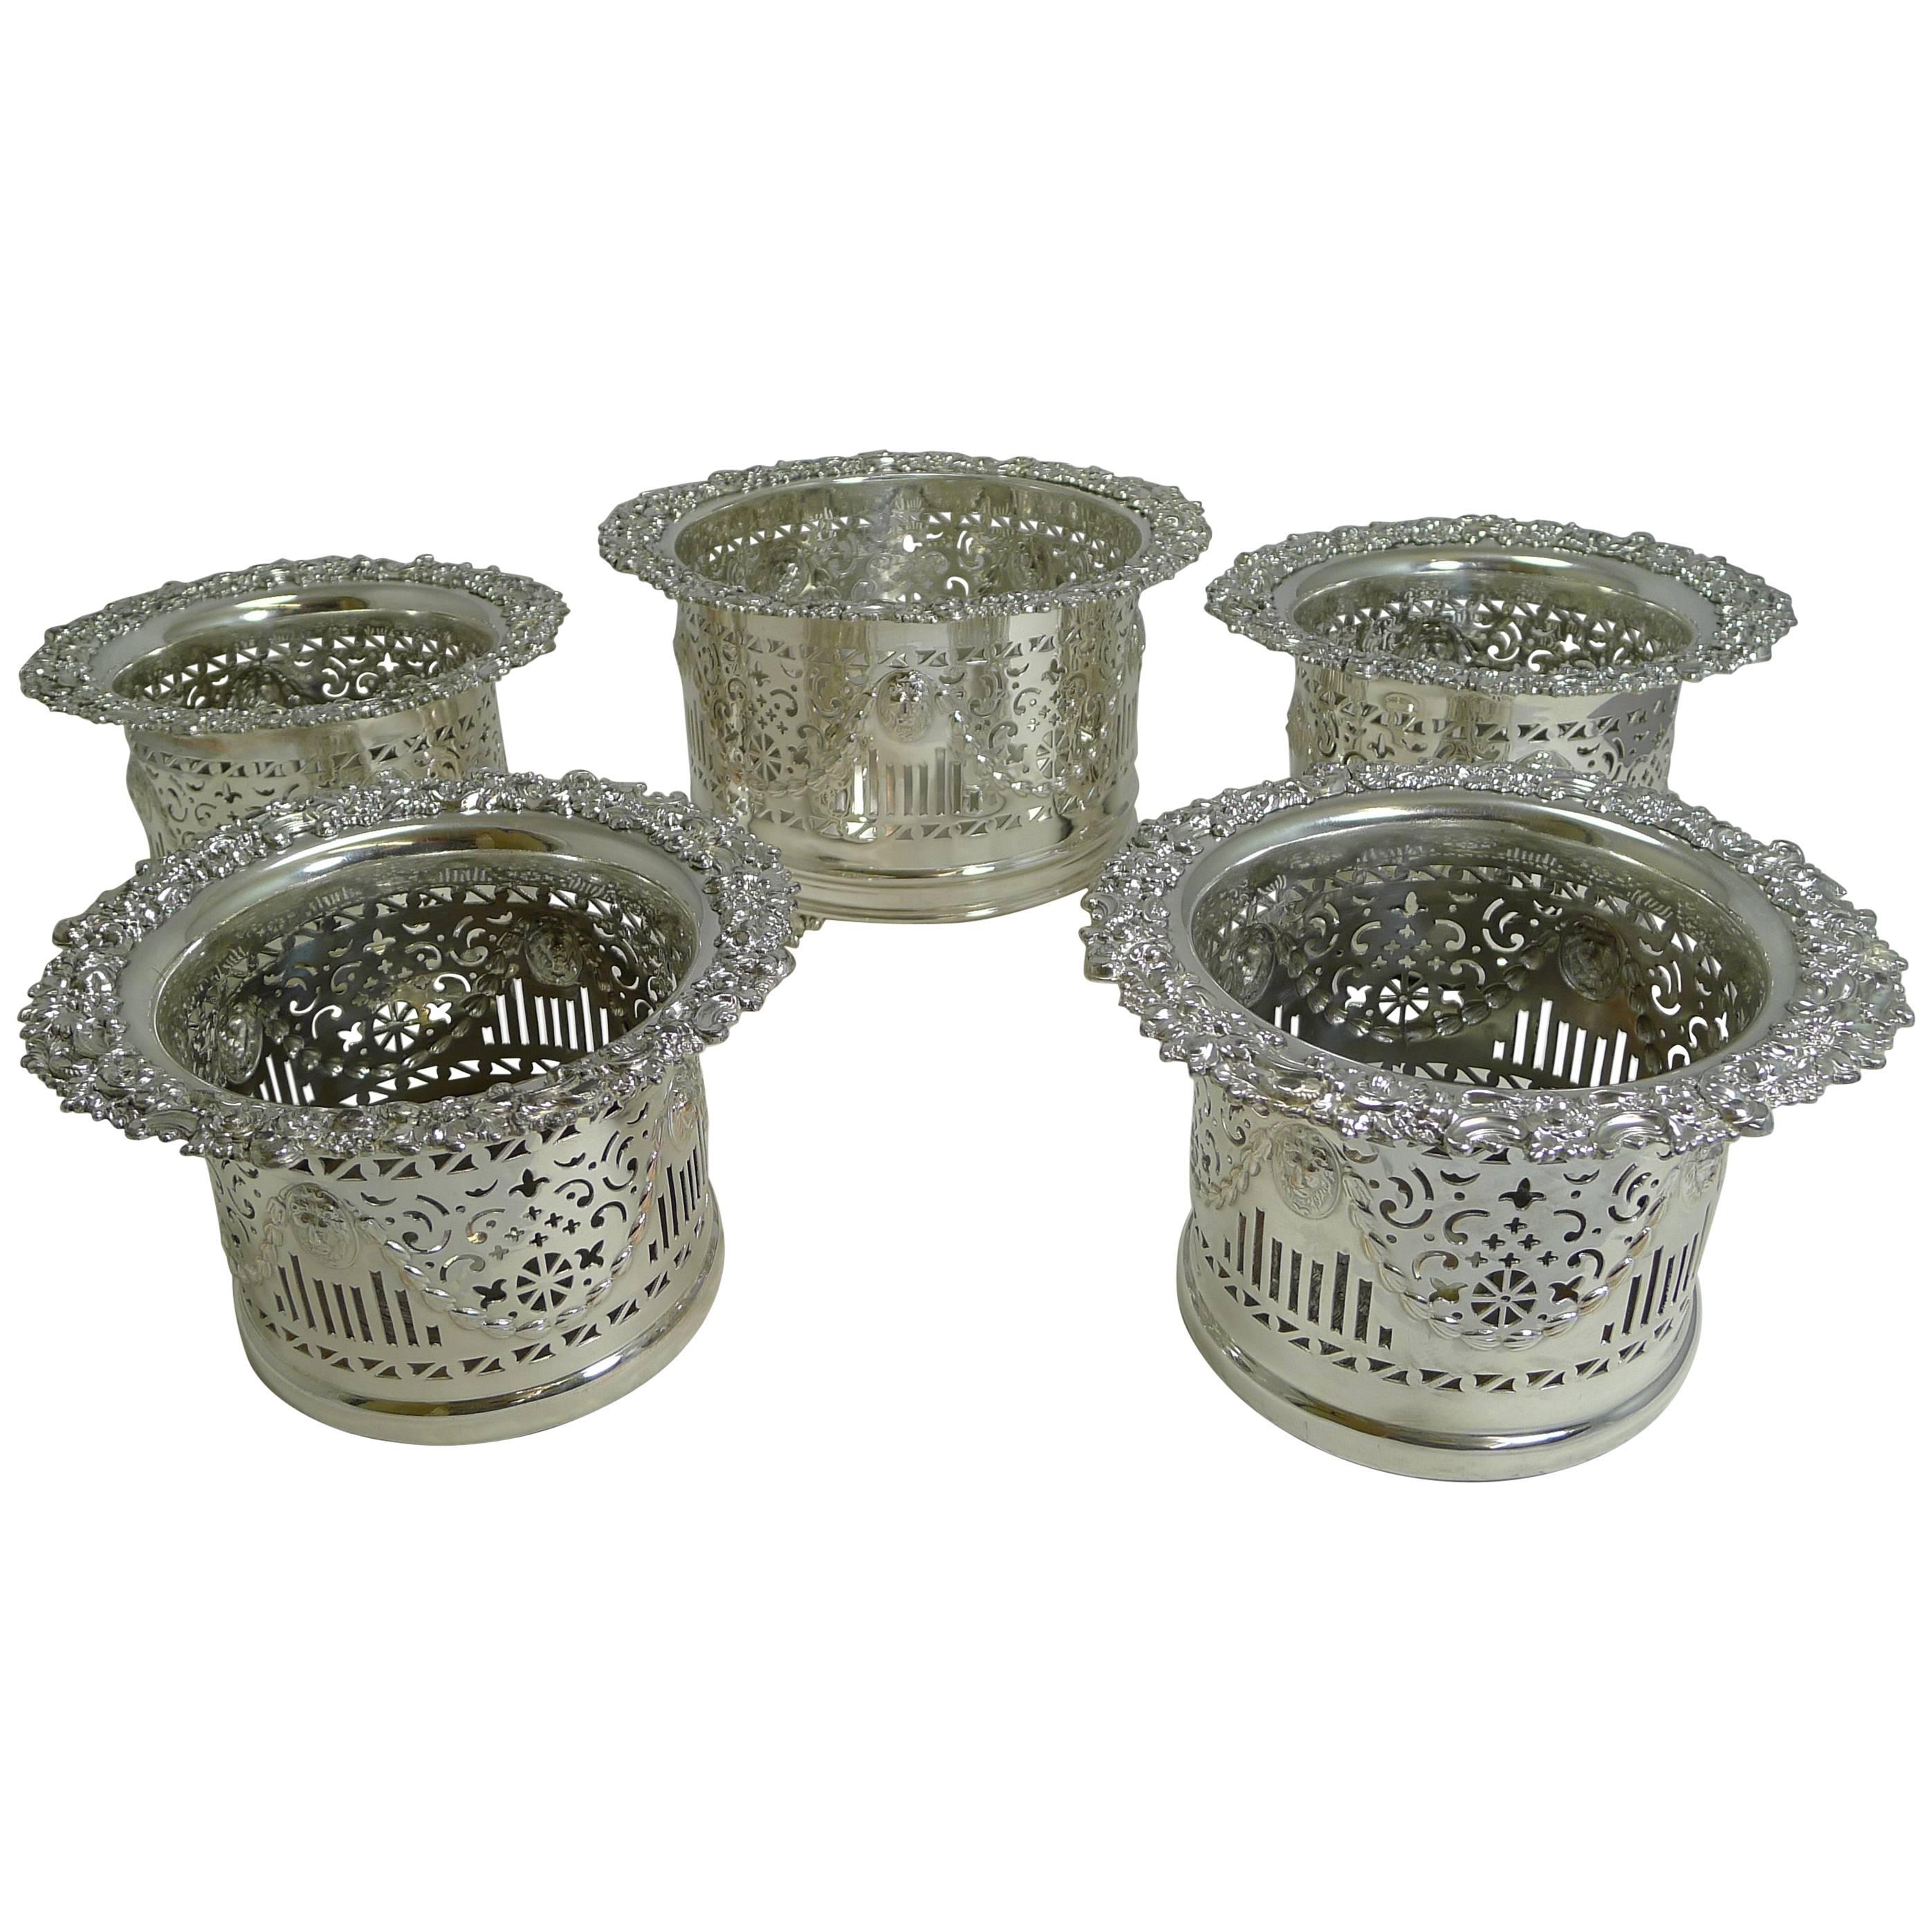 Suite Five Antique English Silver Plated Wine / Champagne Coasters or Holders C